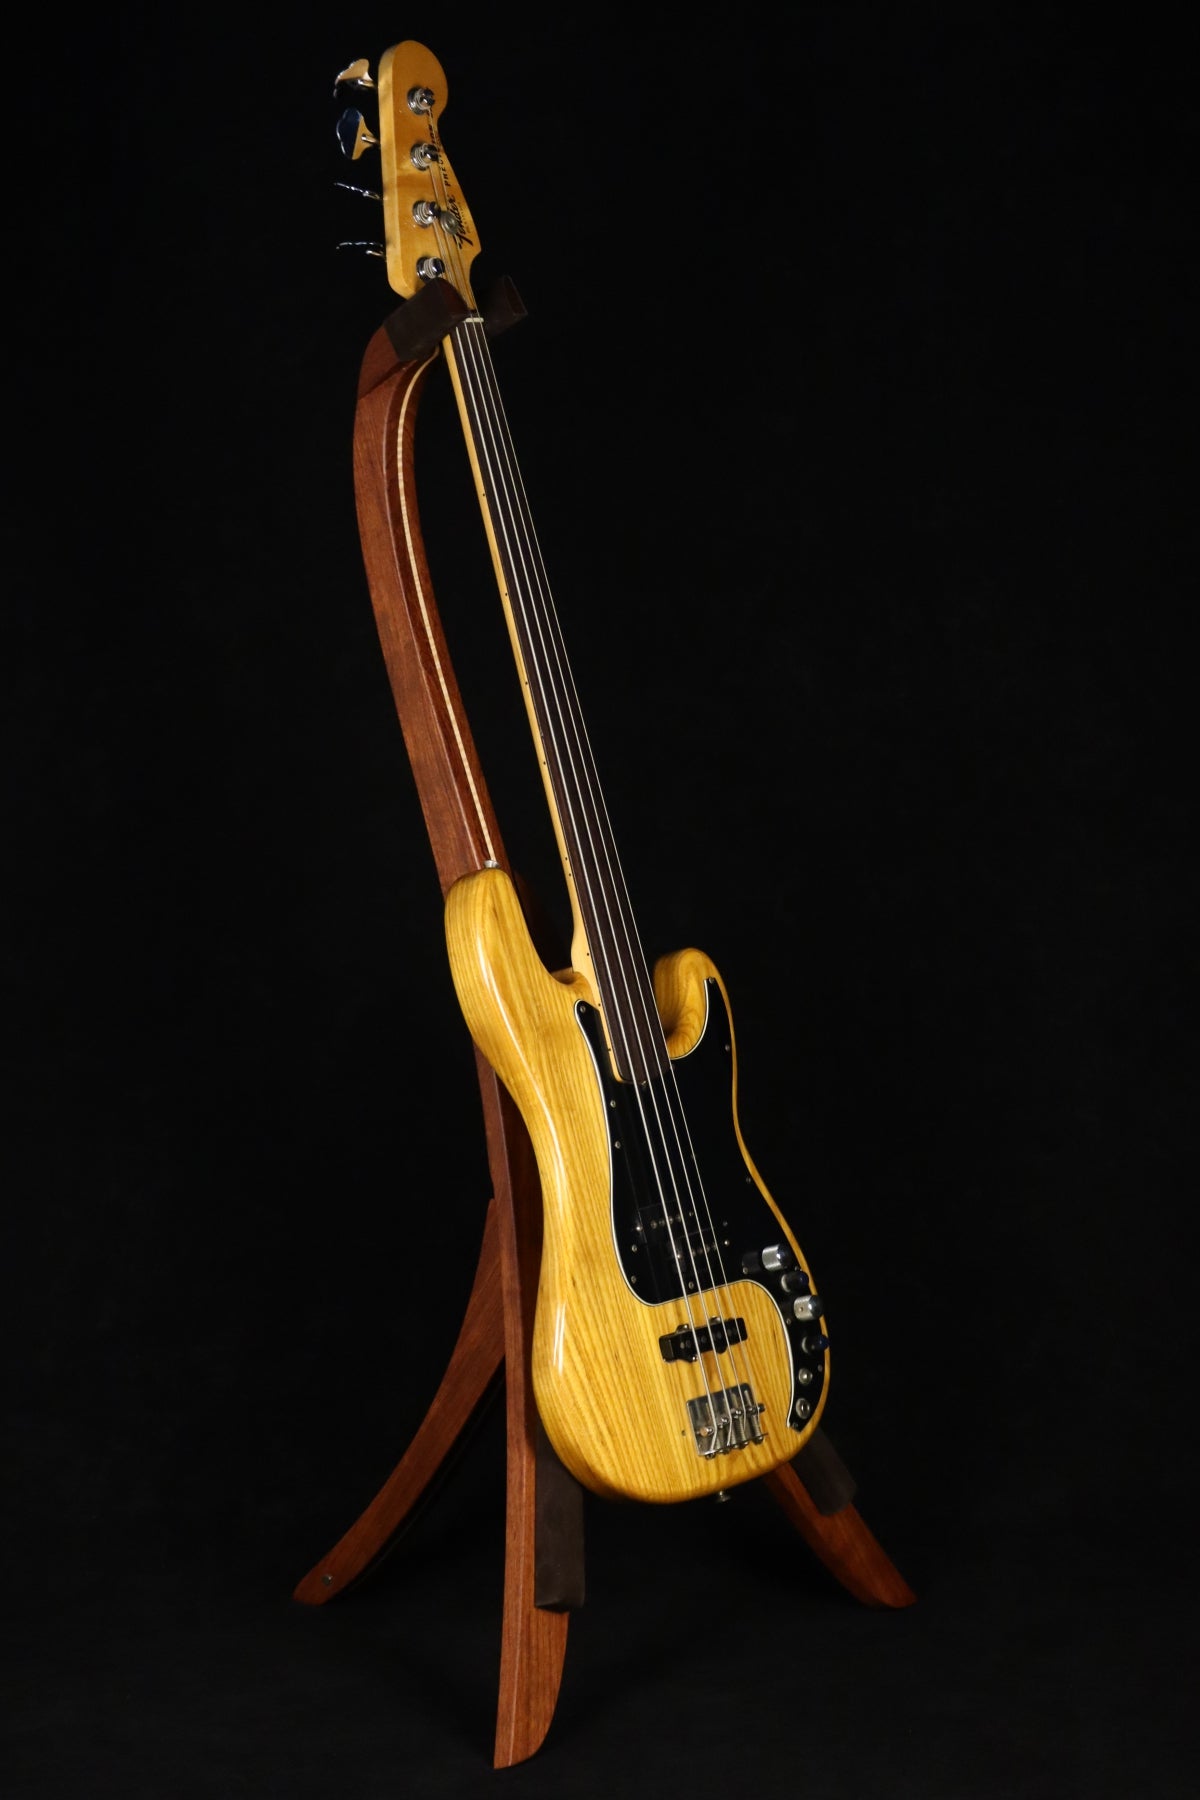 Folding bubinga rosewood and curly maple wood electric bass guitar floor stand full front image with Fender 4 string fretless bass